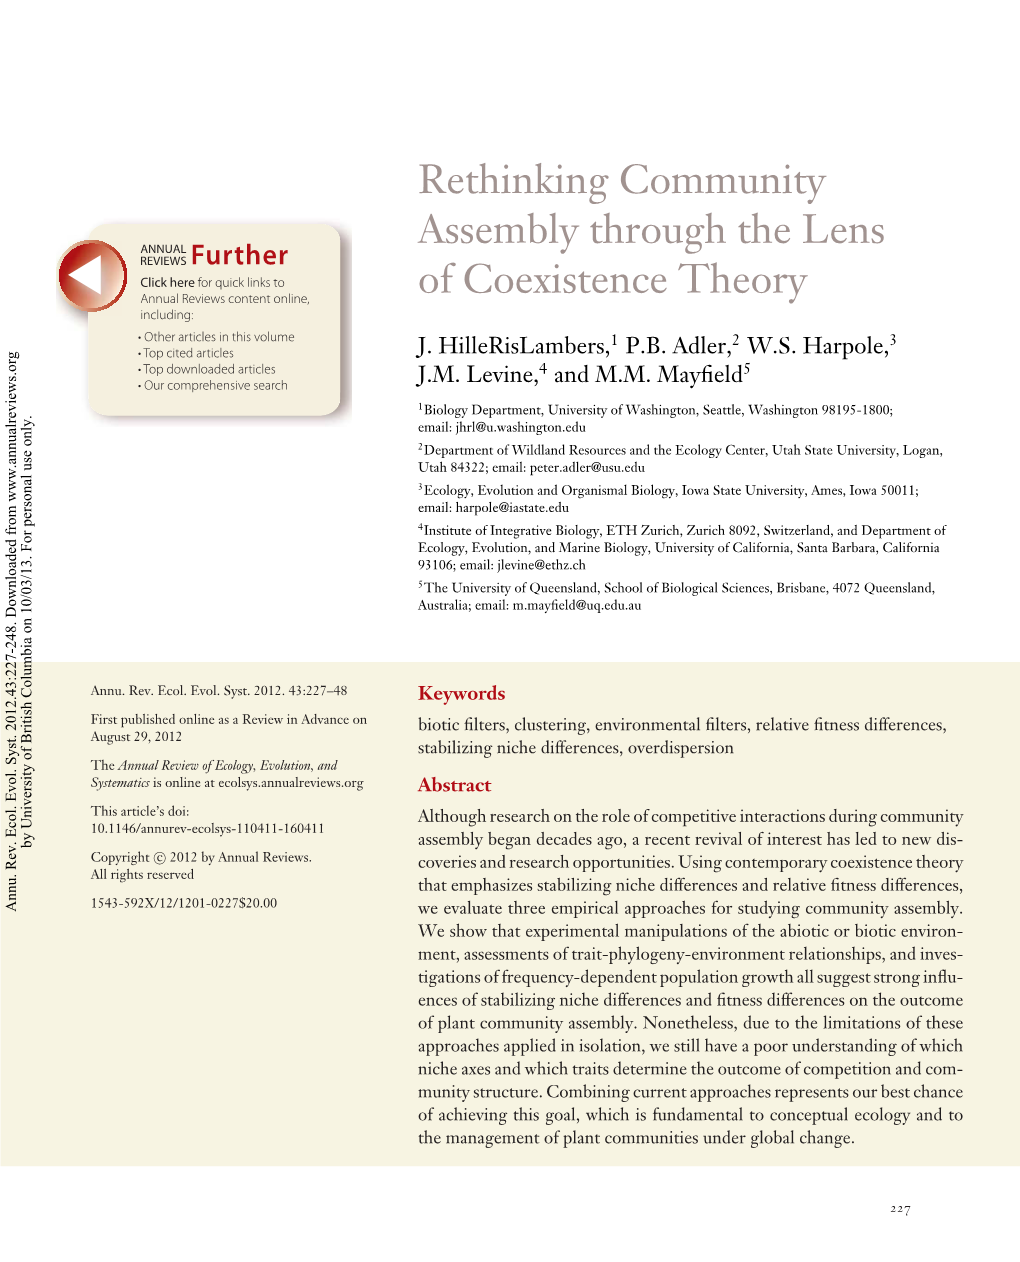 Rethinking Community Assembly Through the Lens of Coexistence Theory